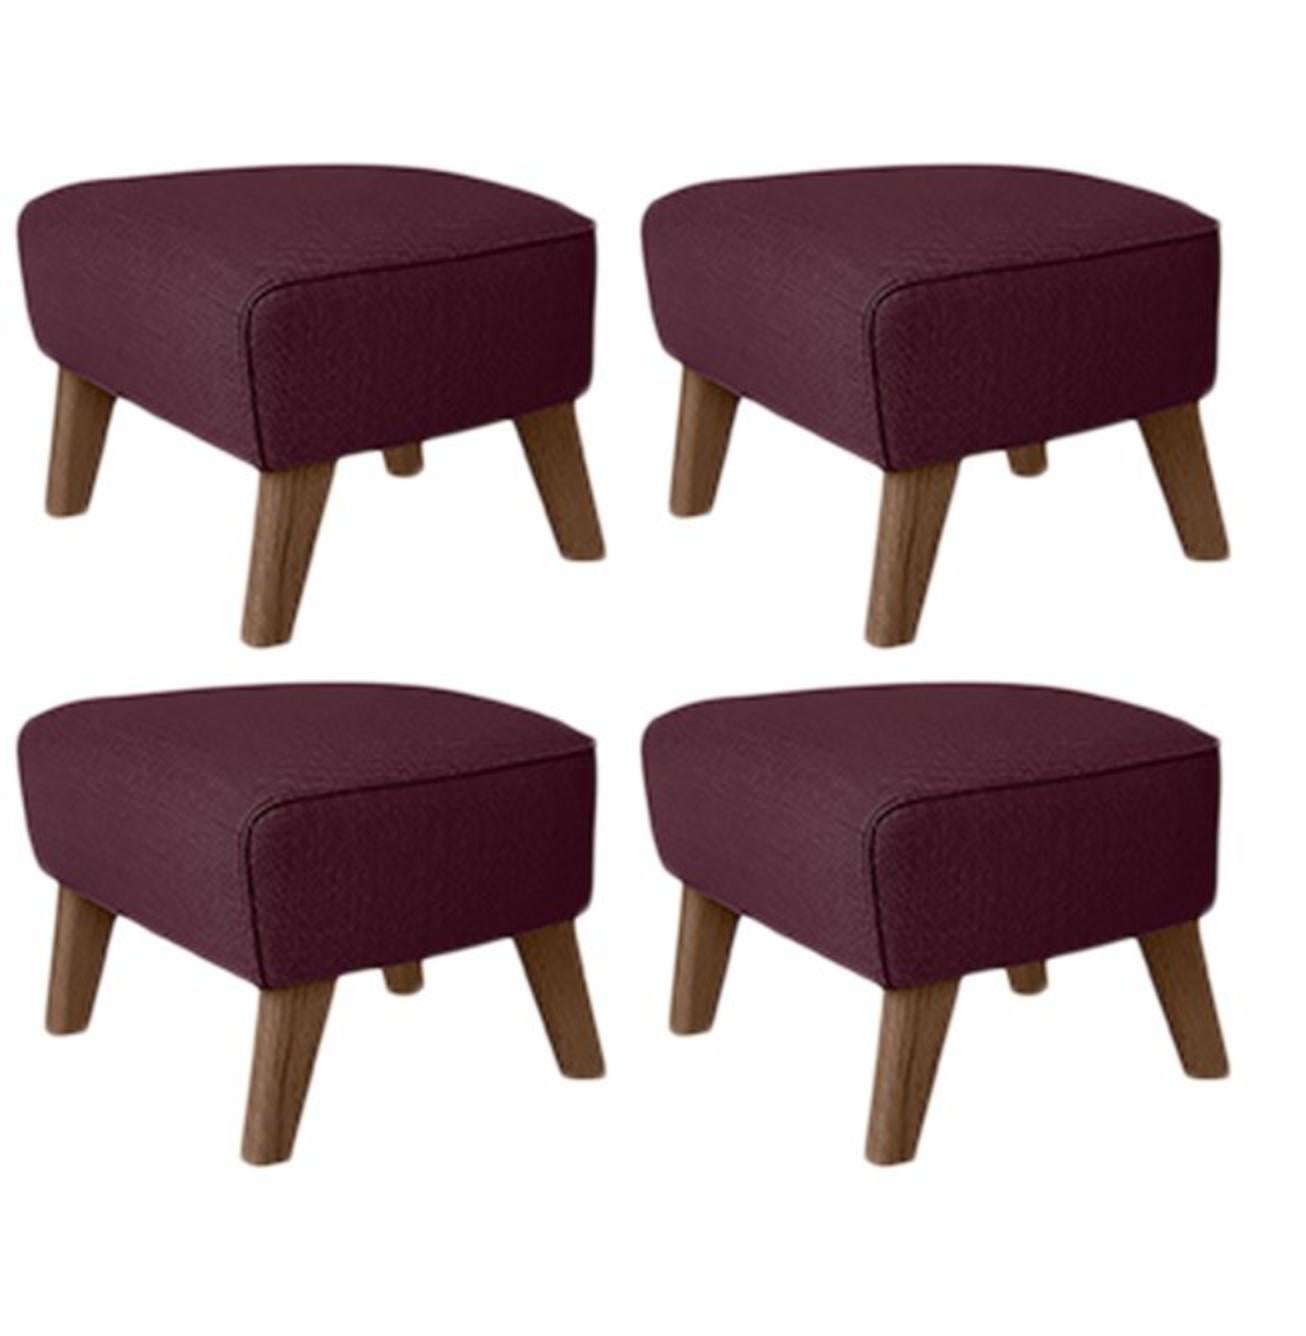 Set of 4 Maroon, smoked oak Raf Simons Vidar 3 my own chair footstool by Lassen
Dimensions: W 56 x D 58 x H 40 cm 
Materials: Textile
Also available: Other colors available.

The my own chair footstool has been designed in the same spirit as